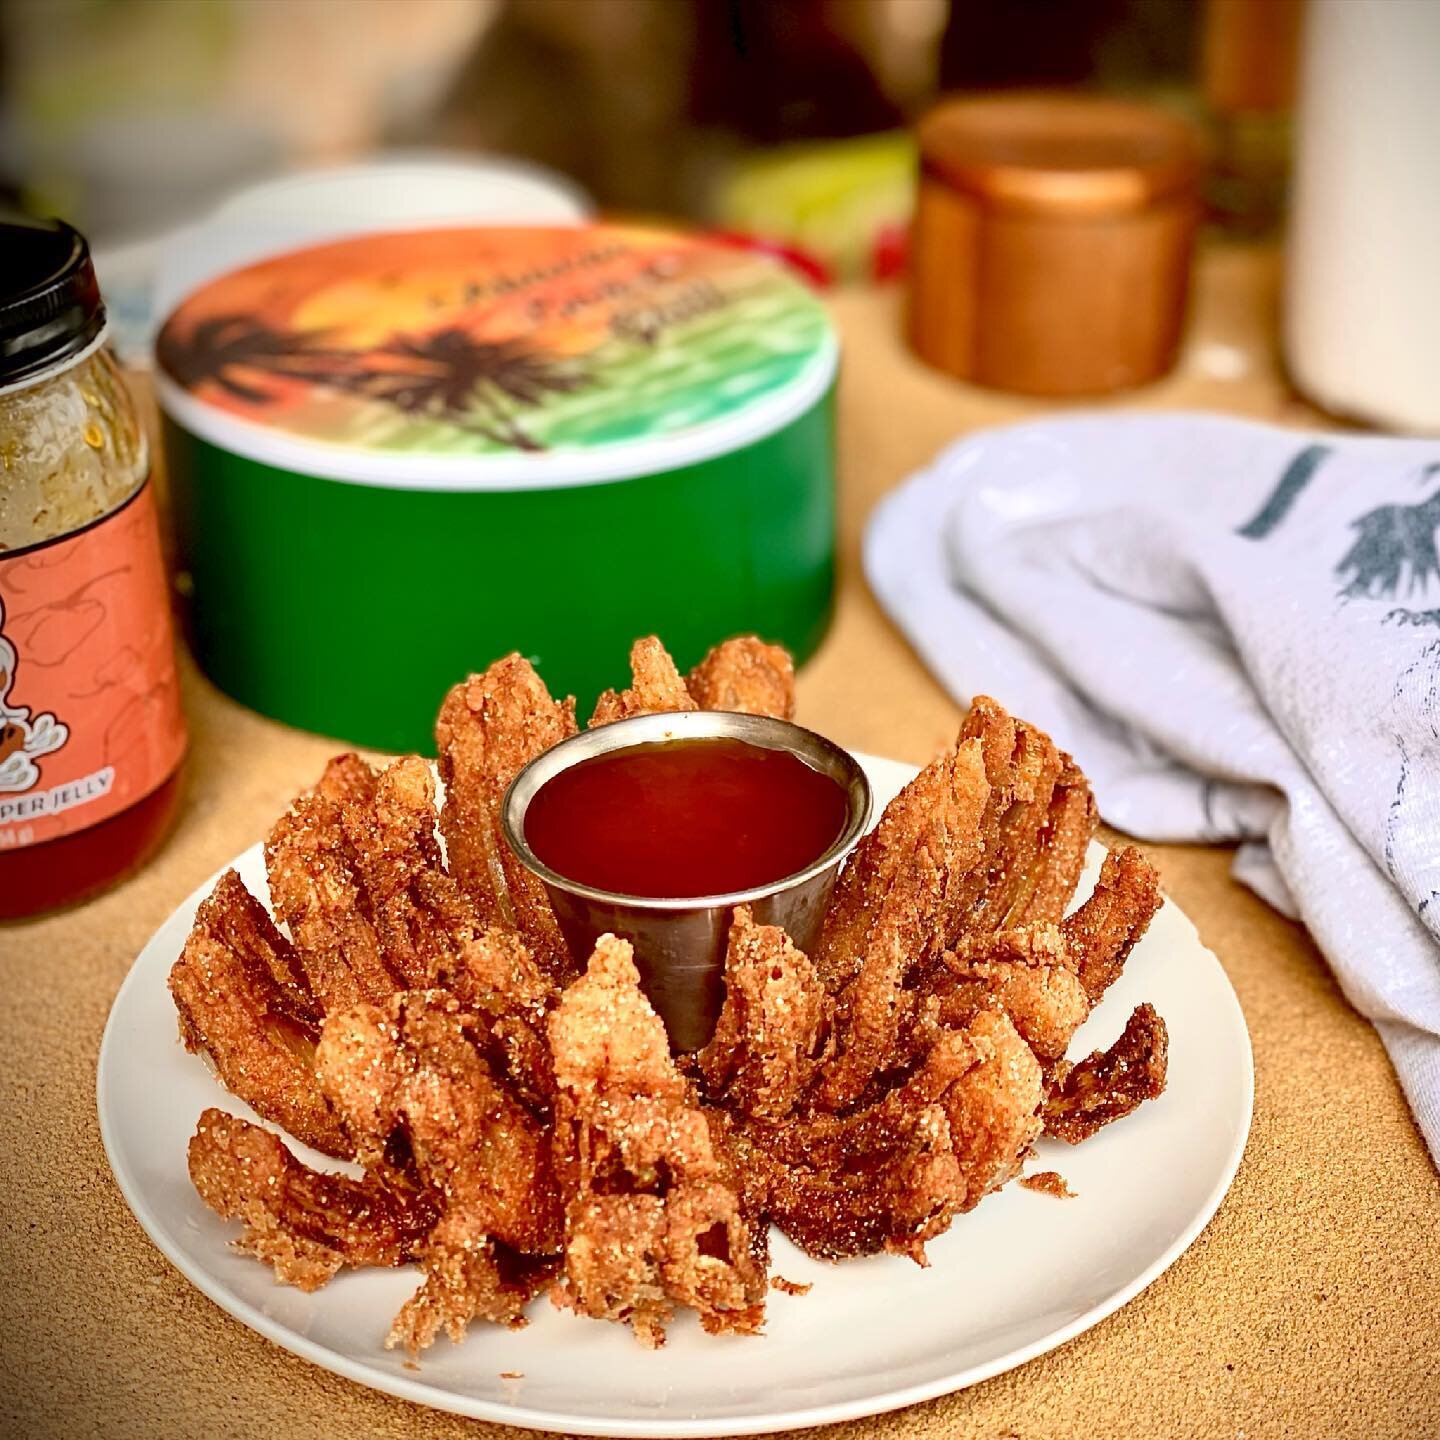 Bloomin&rsquo; Onion, coming soon to a YouTube channel near you&hellip;